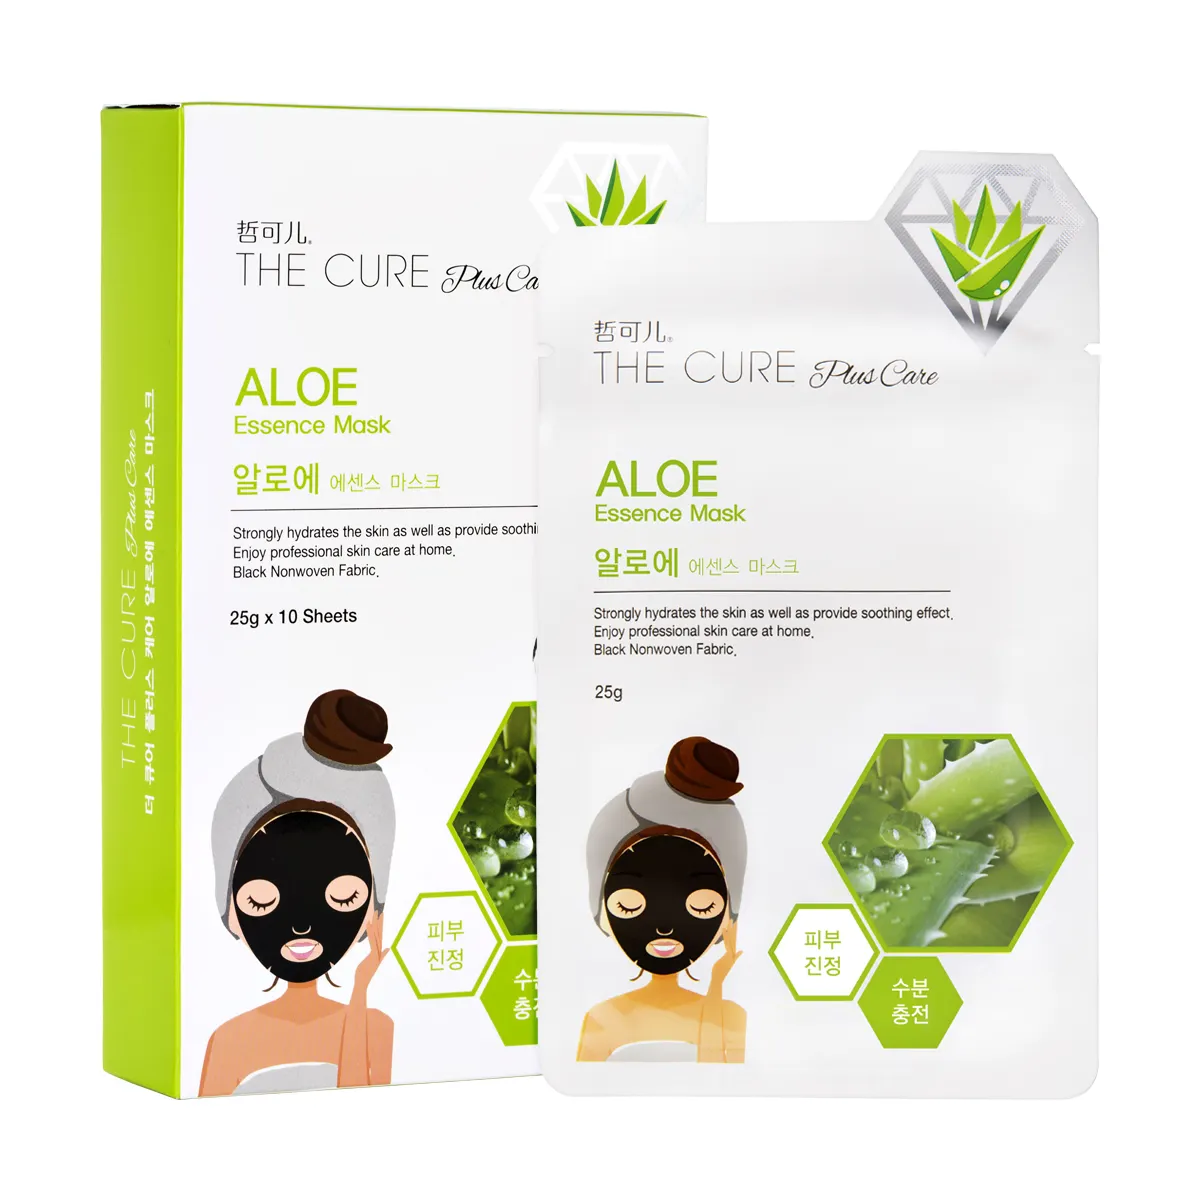 Korean natural beauty with the pure ingredient from the clean nature THE CURE Plus Care Aloe Essence Mask